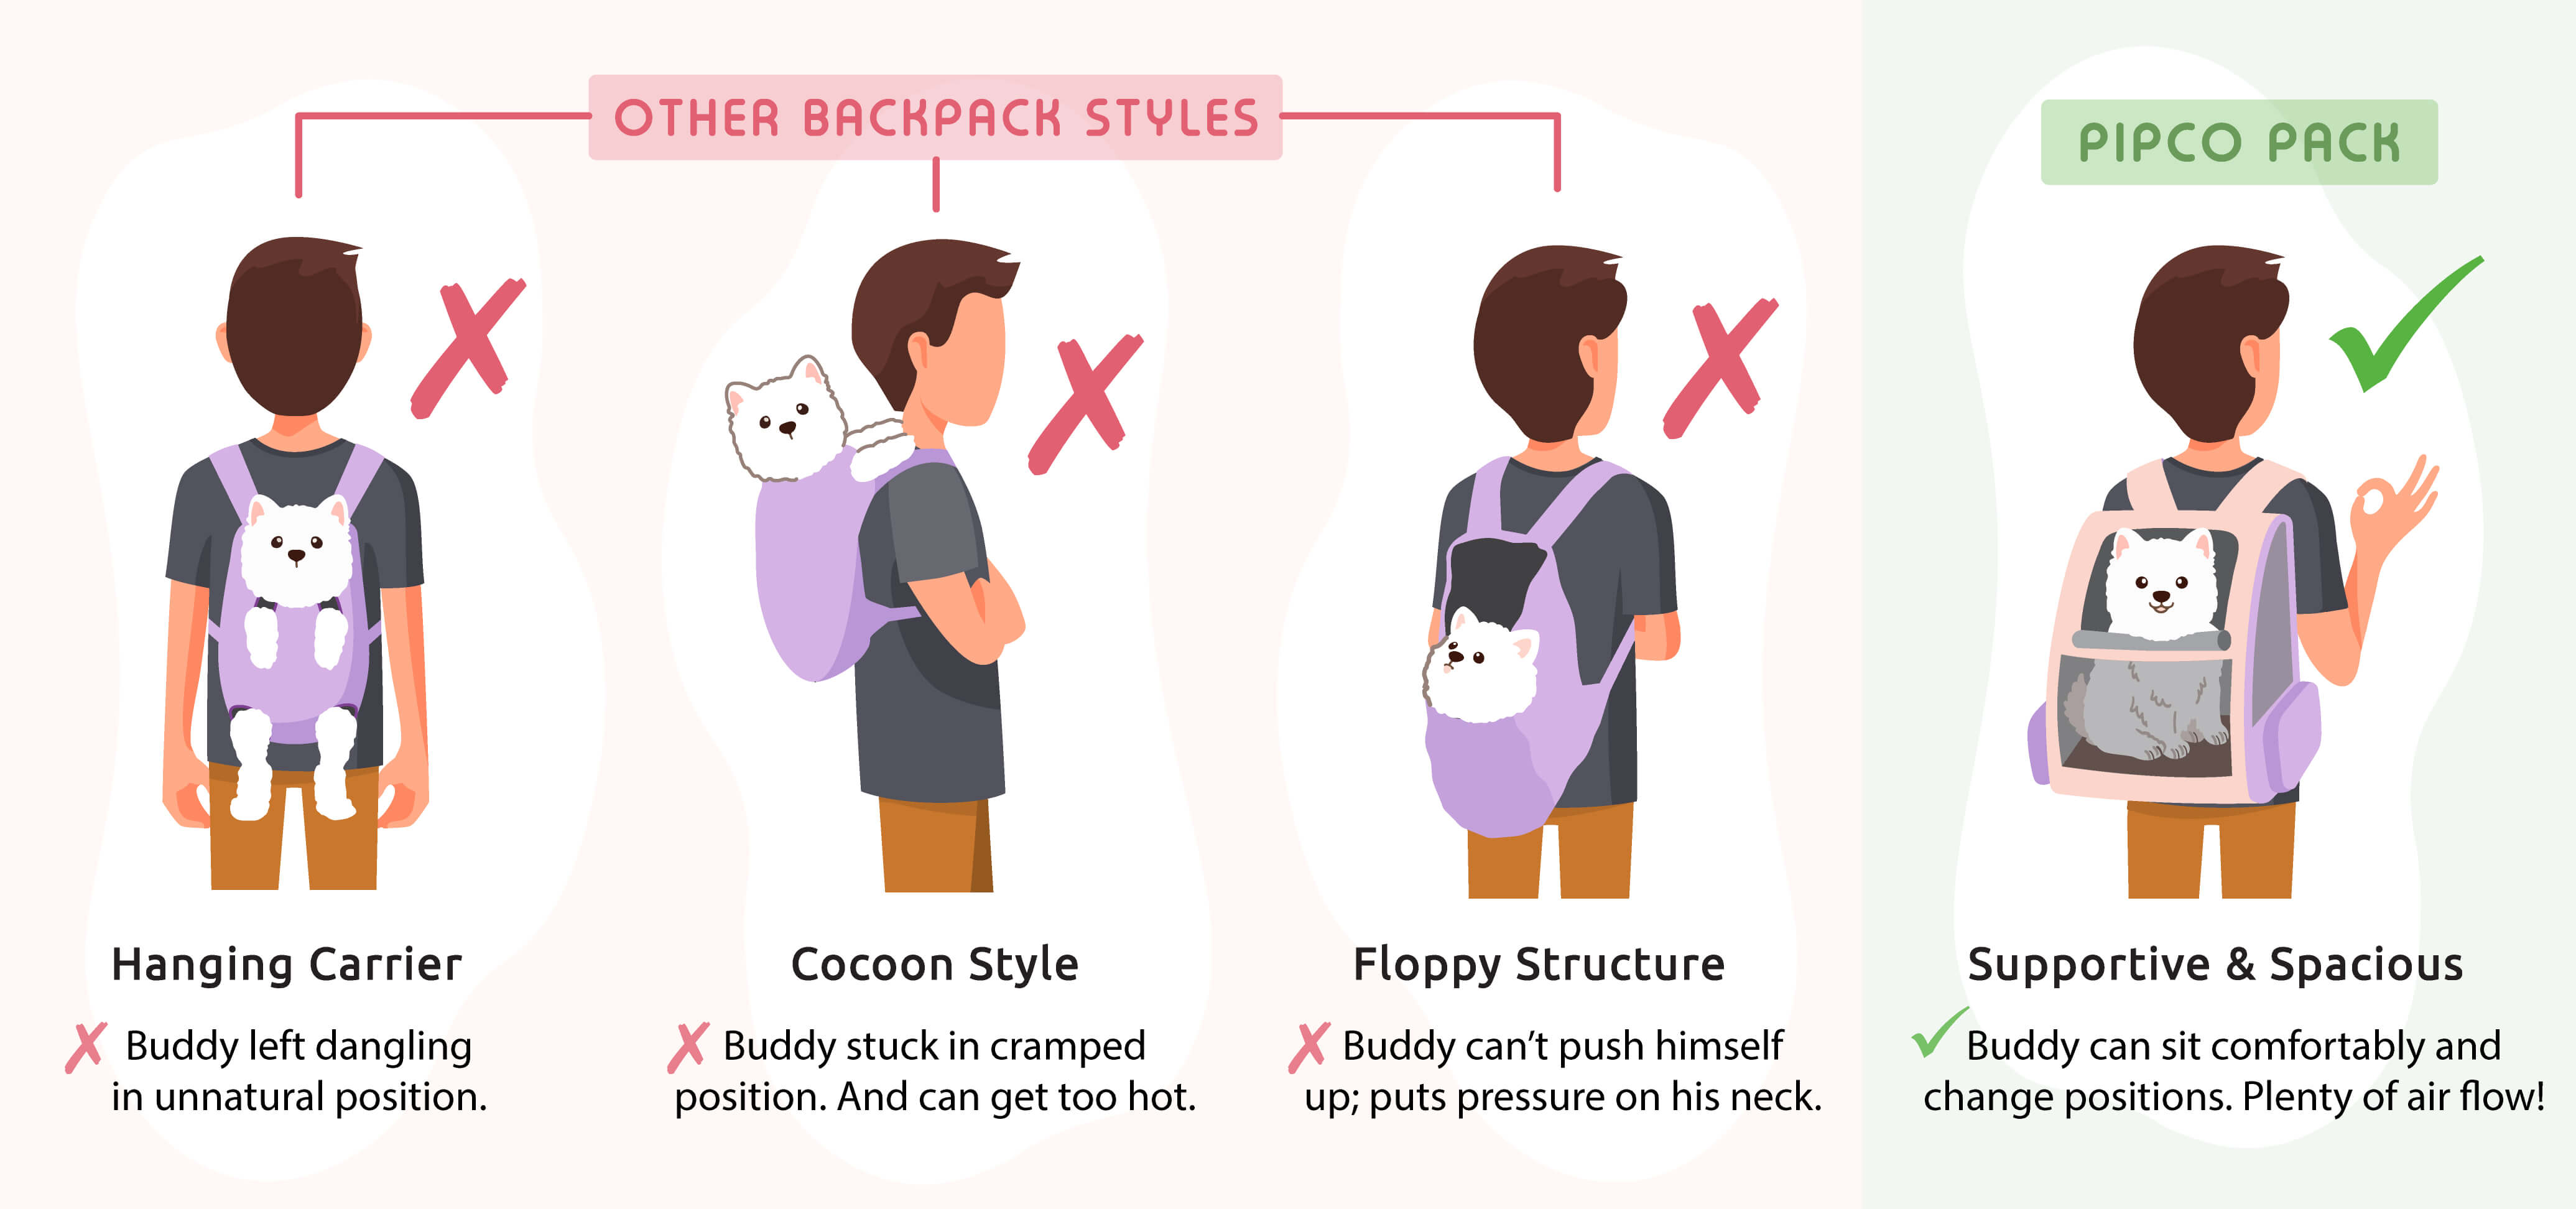 Comparison chart of dog backpack carrier styles Australia. Pipco Pack is the most supportive and spacious compared to other rucksacks, bags, and knapsacks.